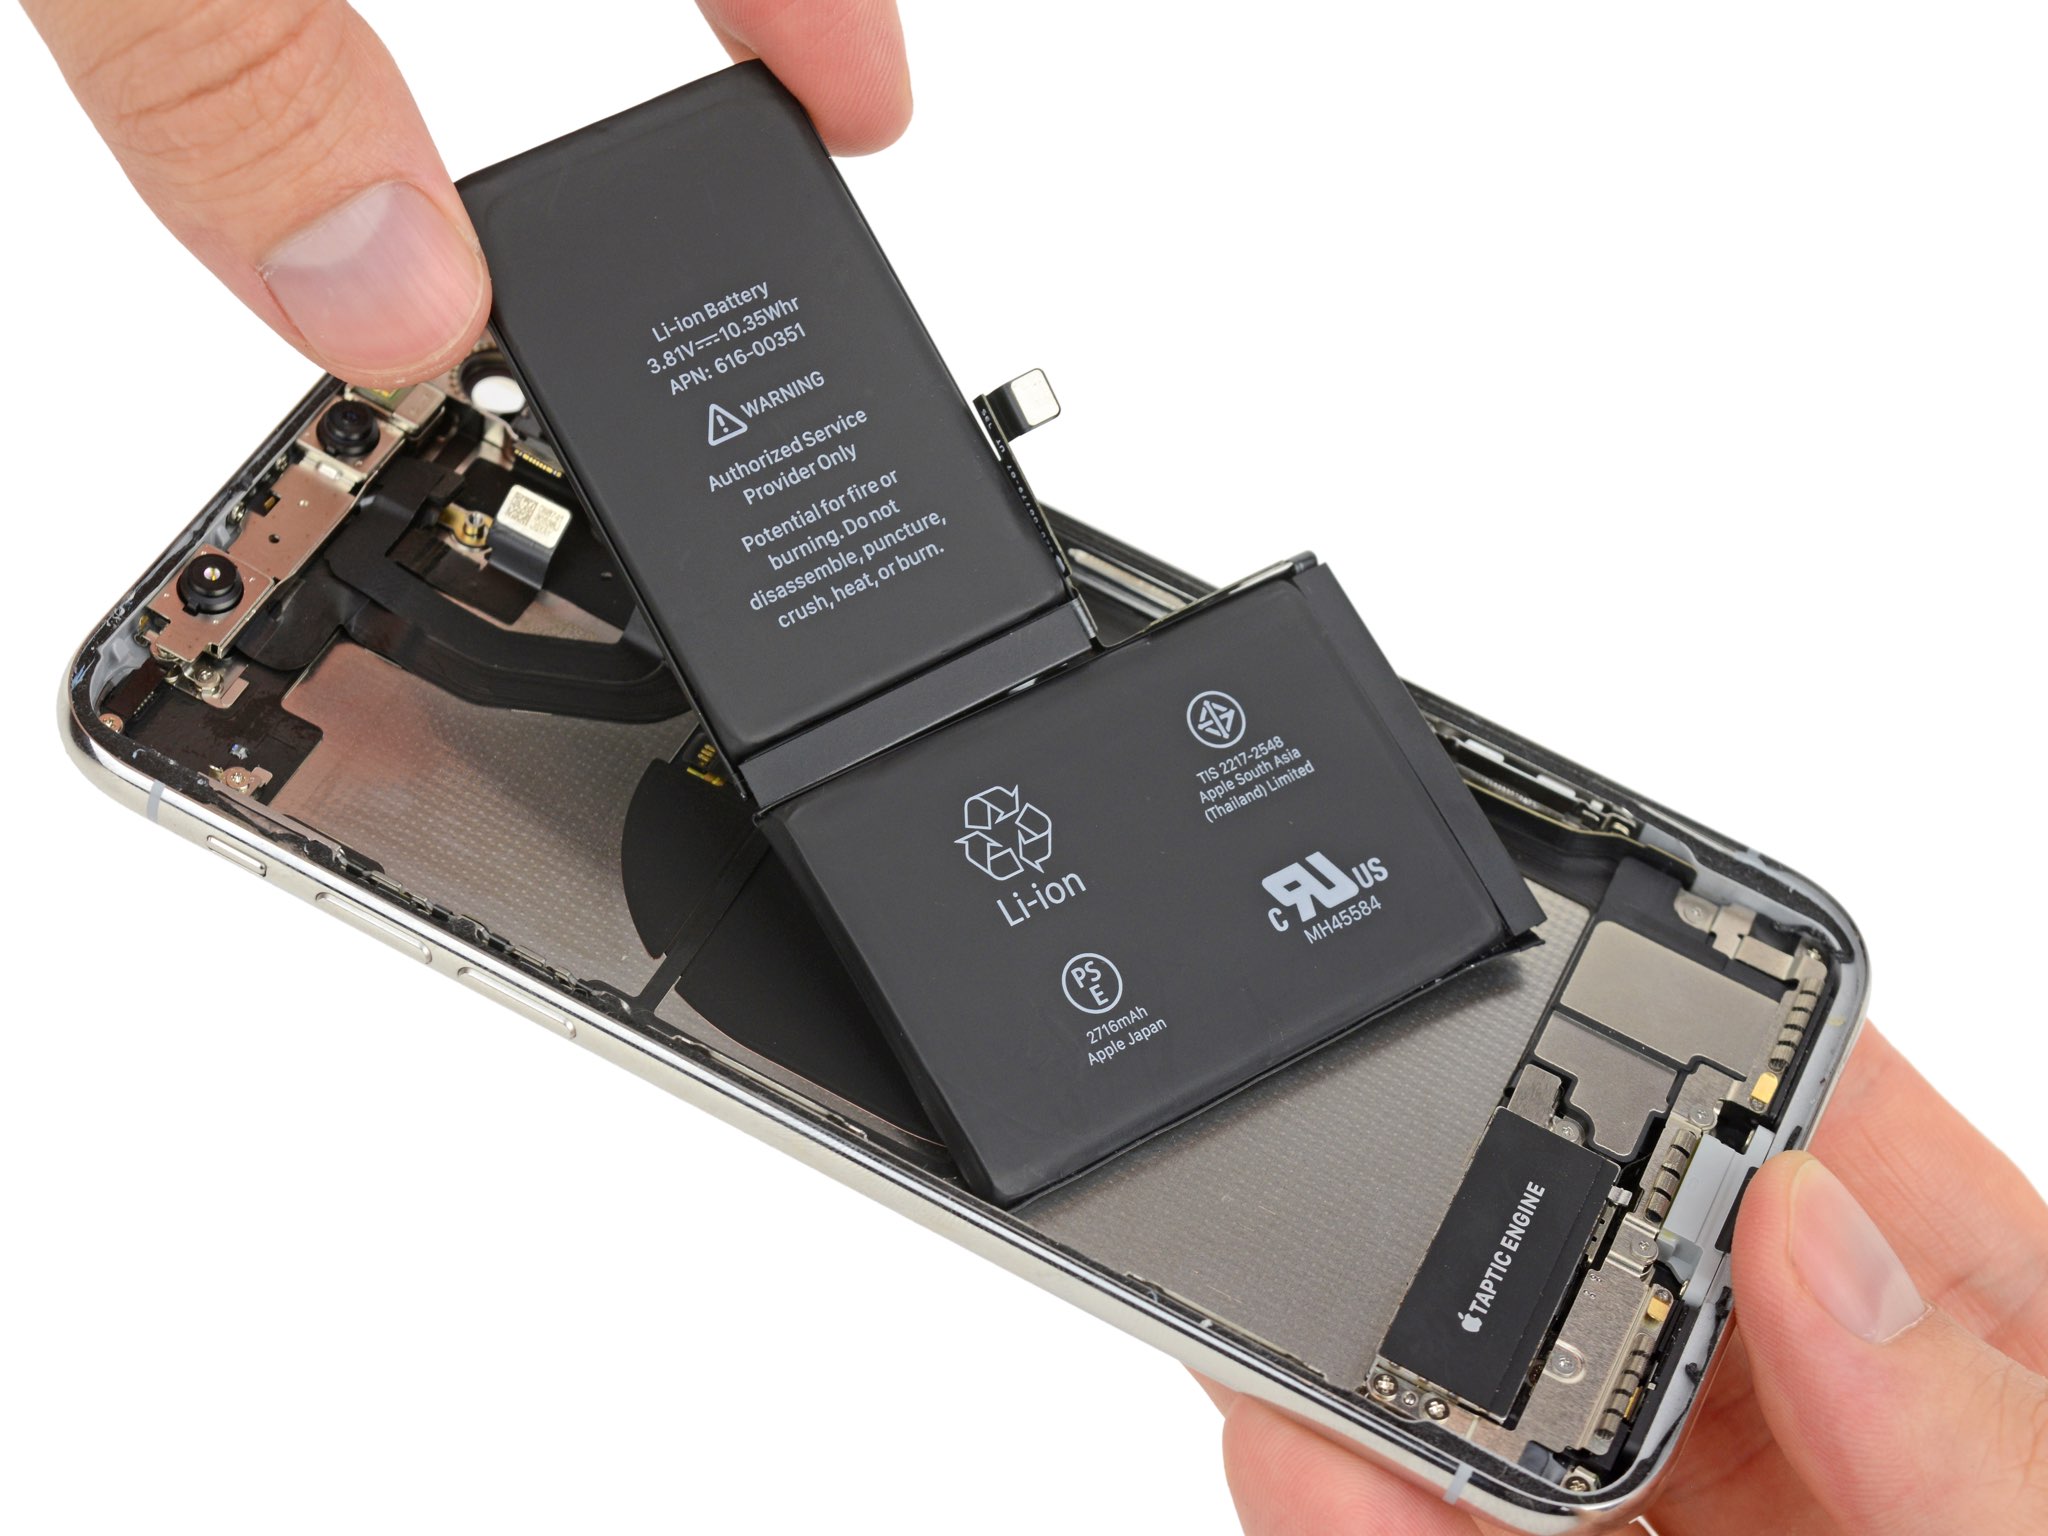 Apple is the target of class action in Canada on iPhone batteries